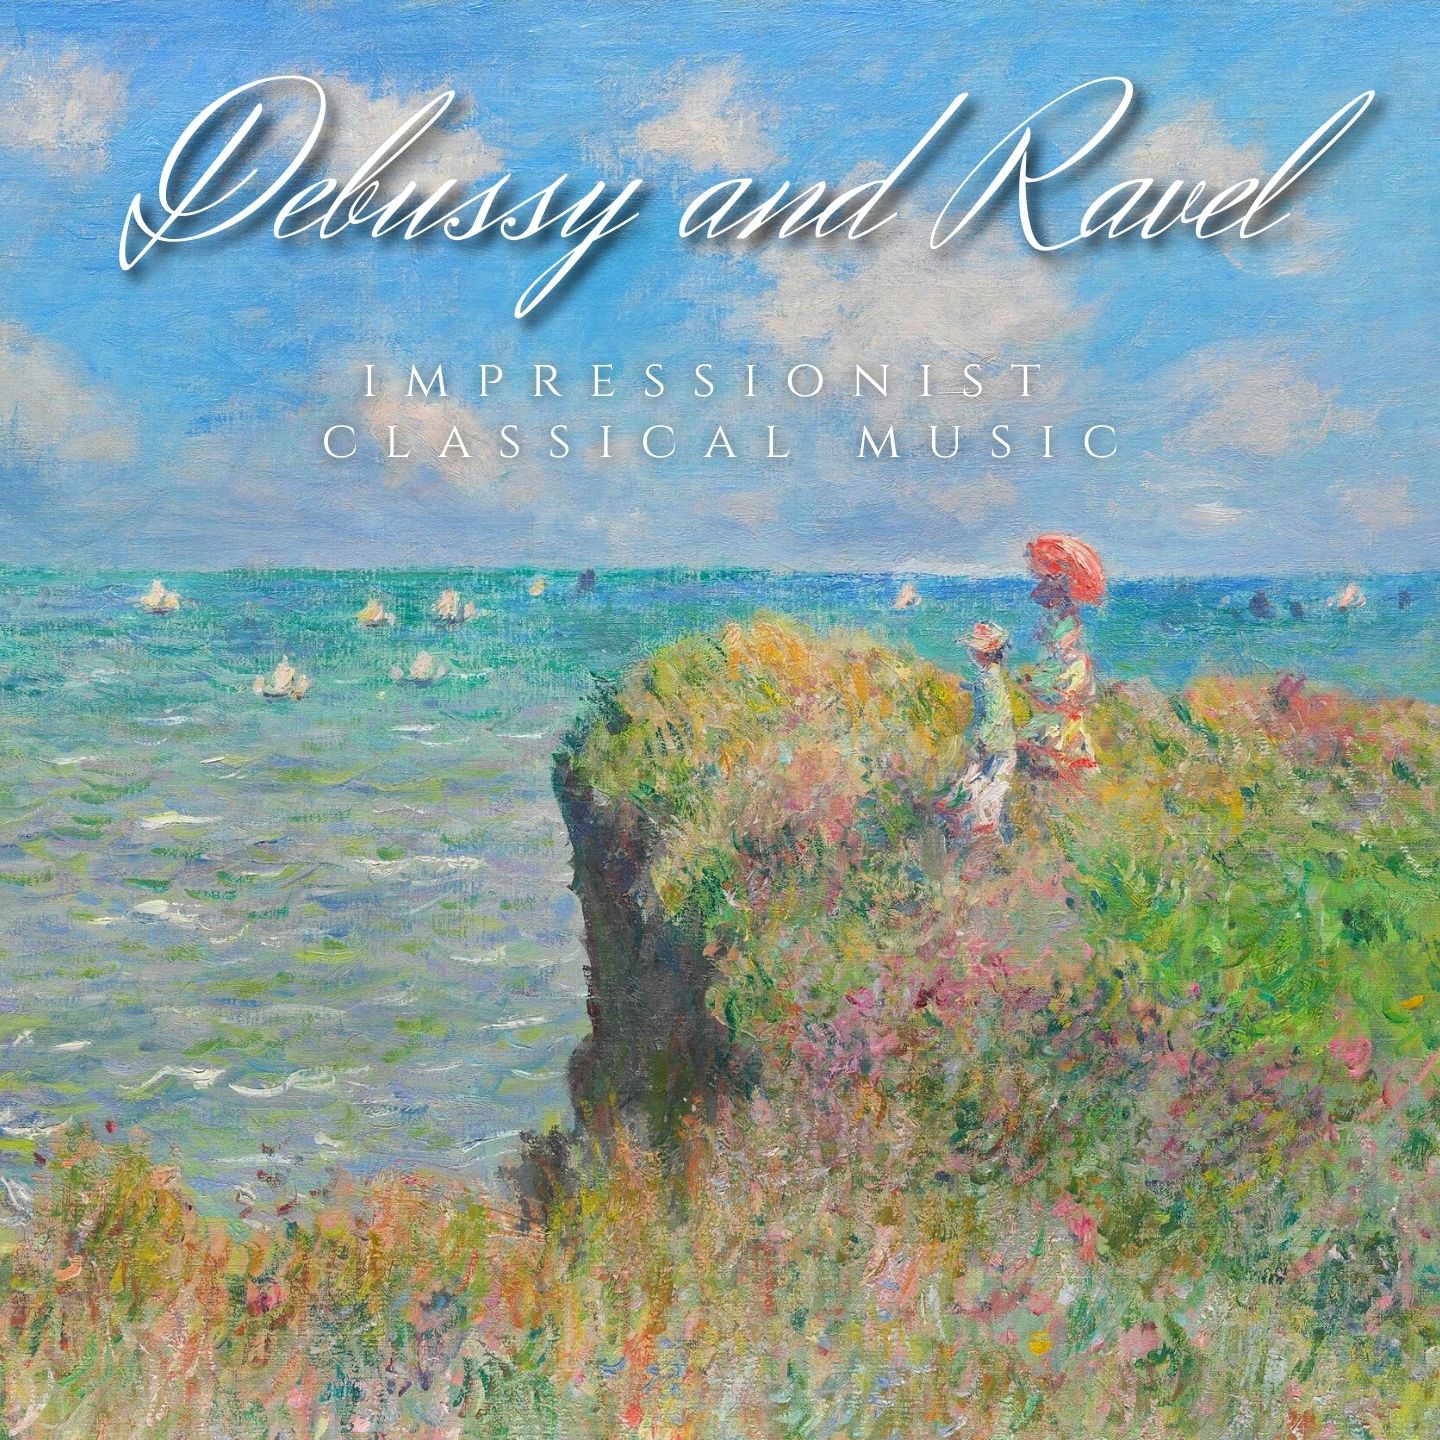 Debussy and Ravel - Impressionist Classical Music